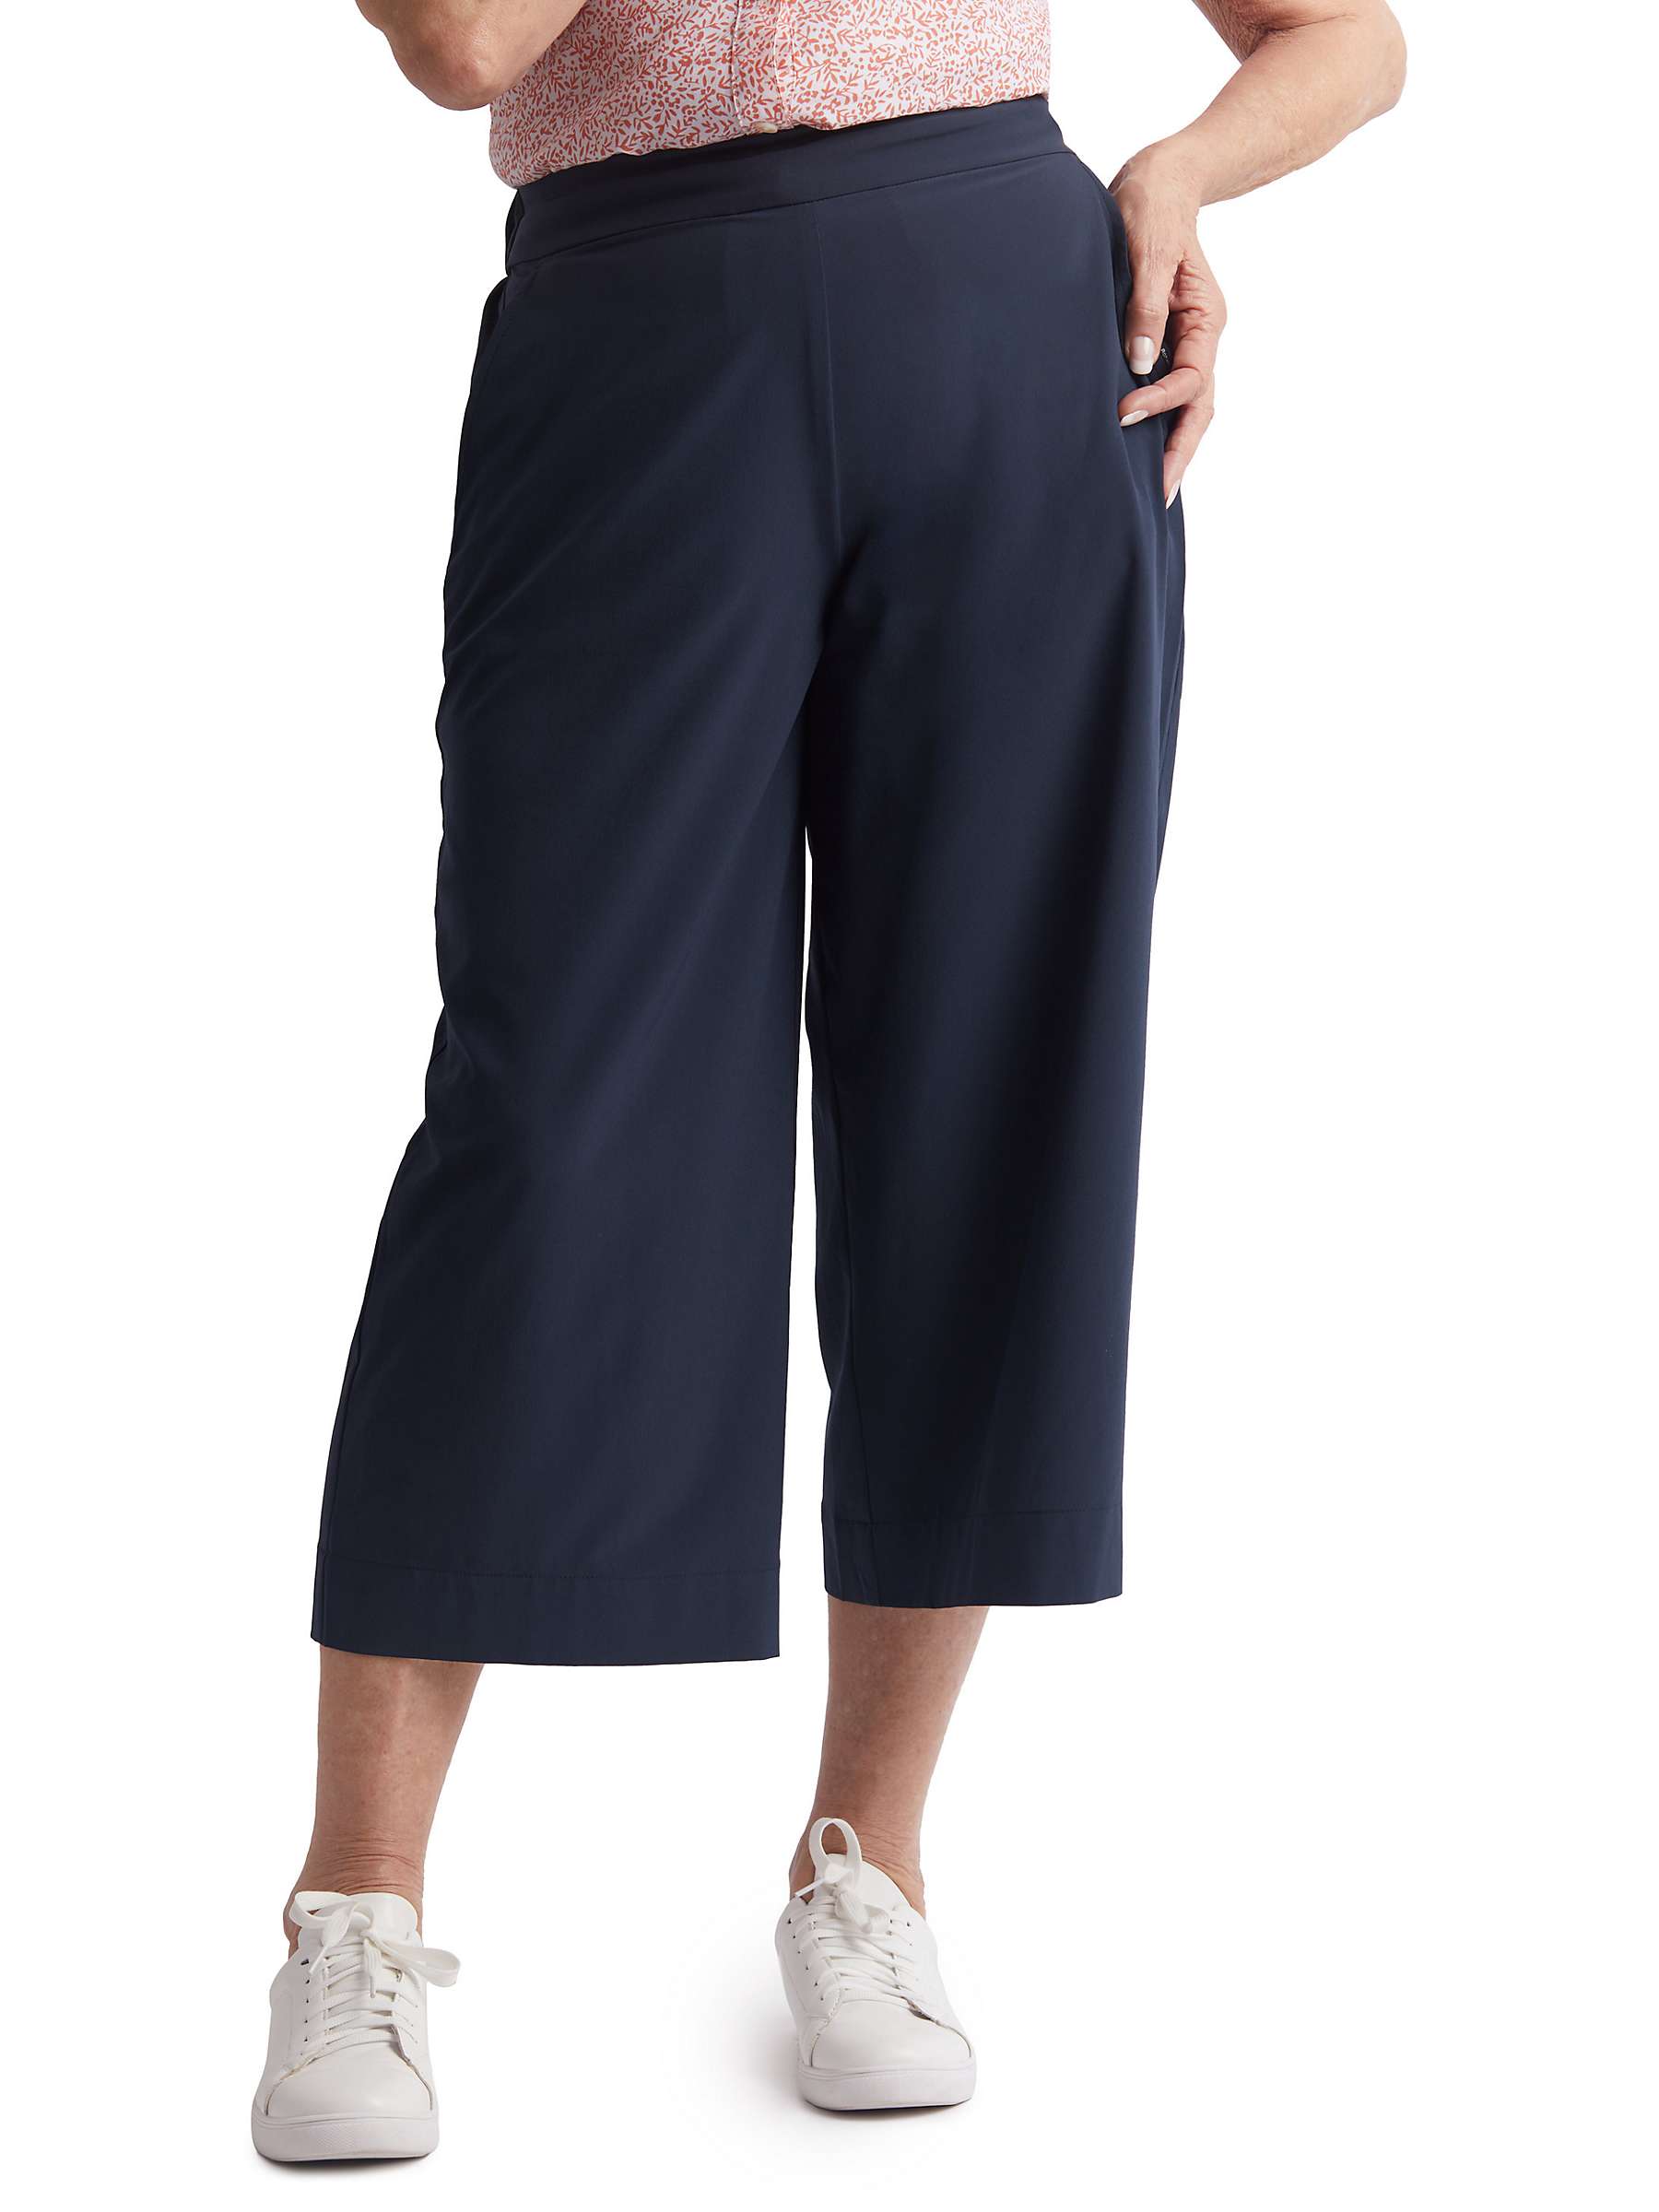 Buy Rohan Voyager Capris Trousers Online at johnlewis.com